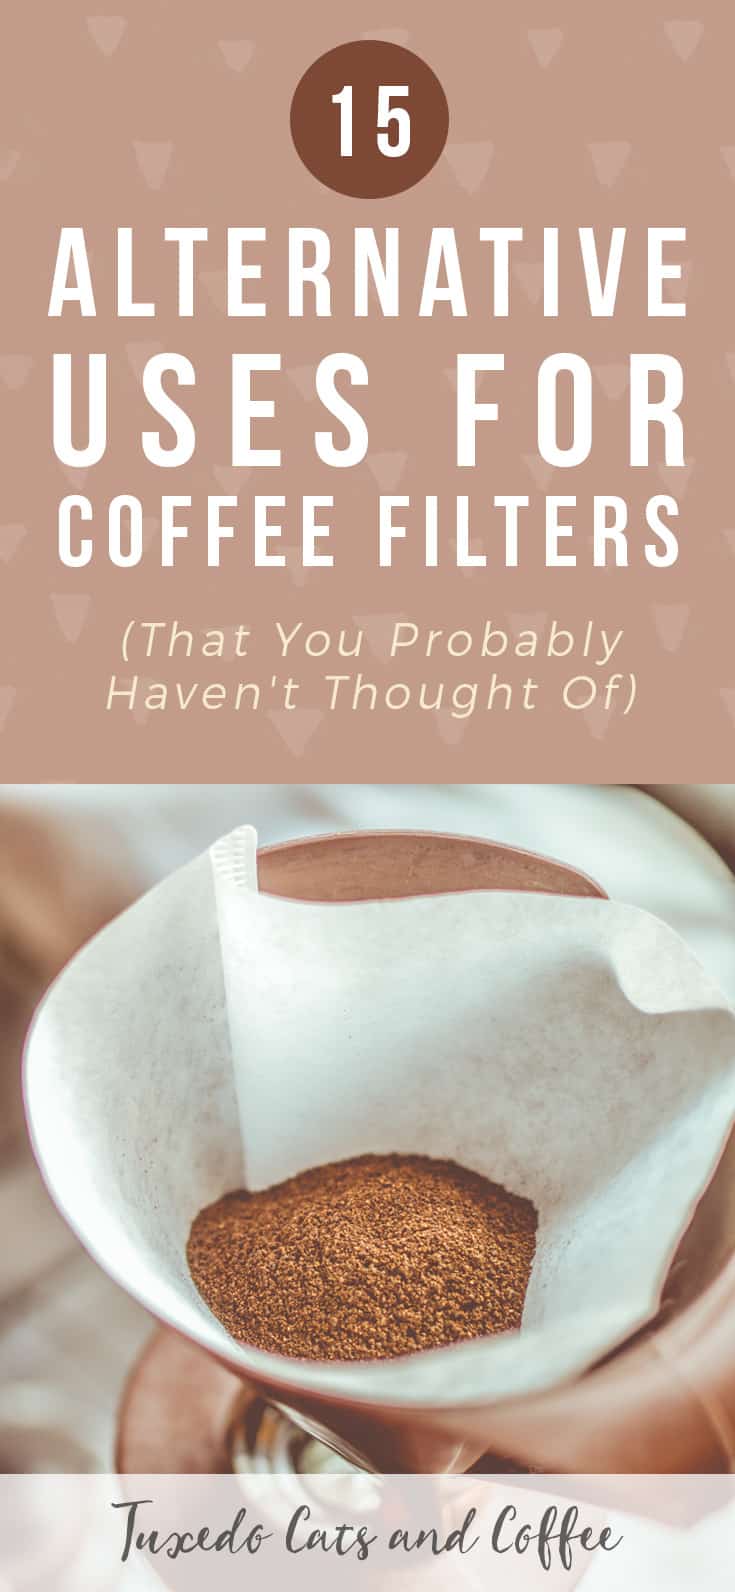 Alternative Uses for Coffee Filters